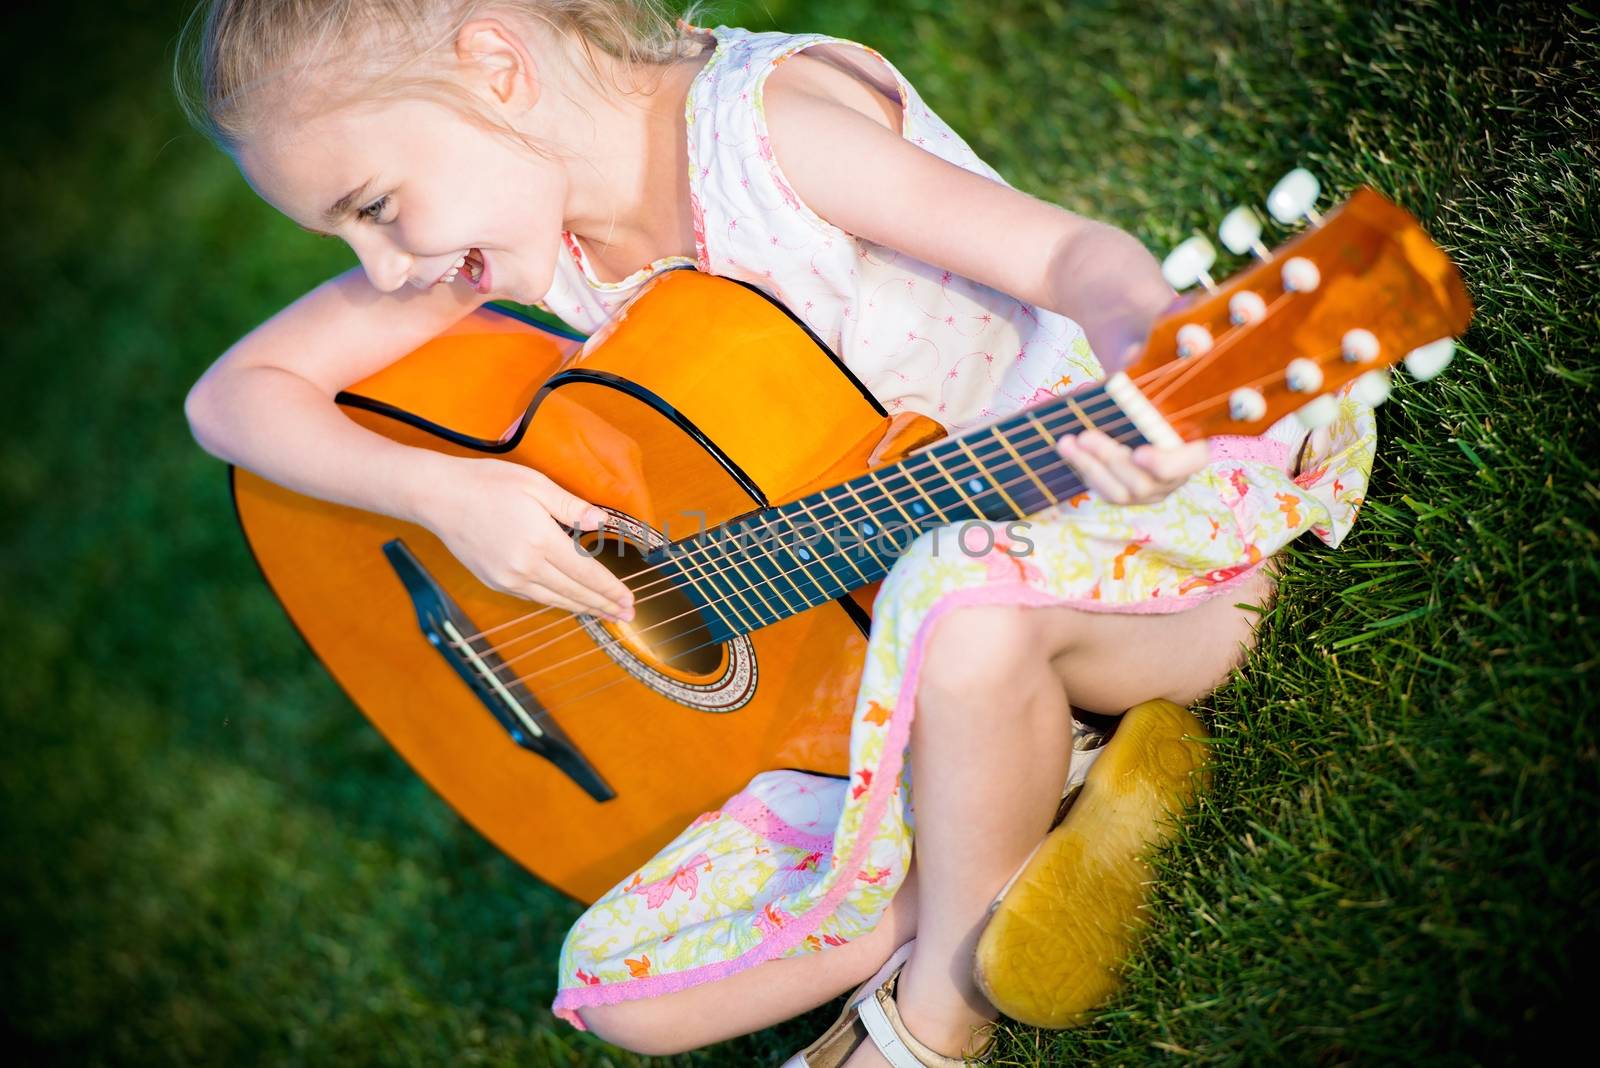 Little Guitar Player by welcomia